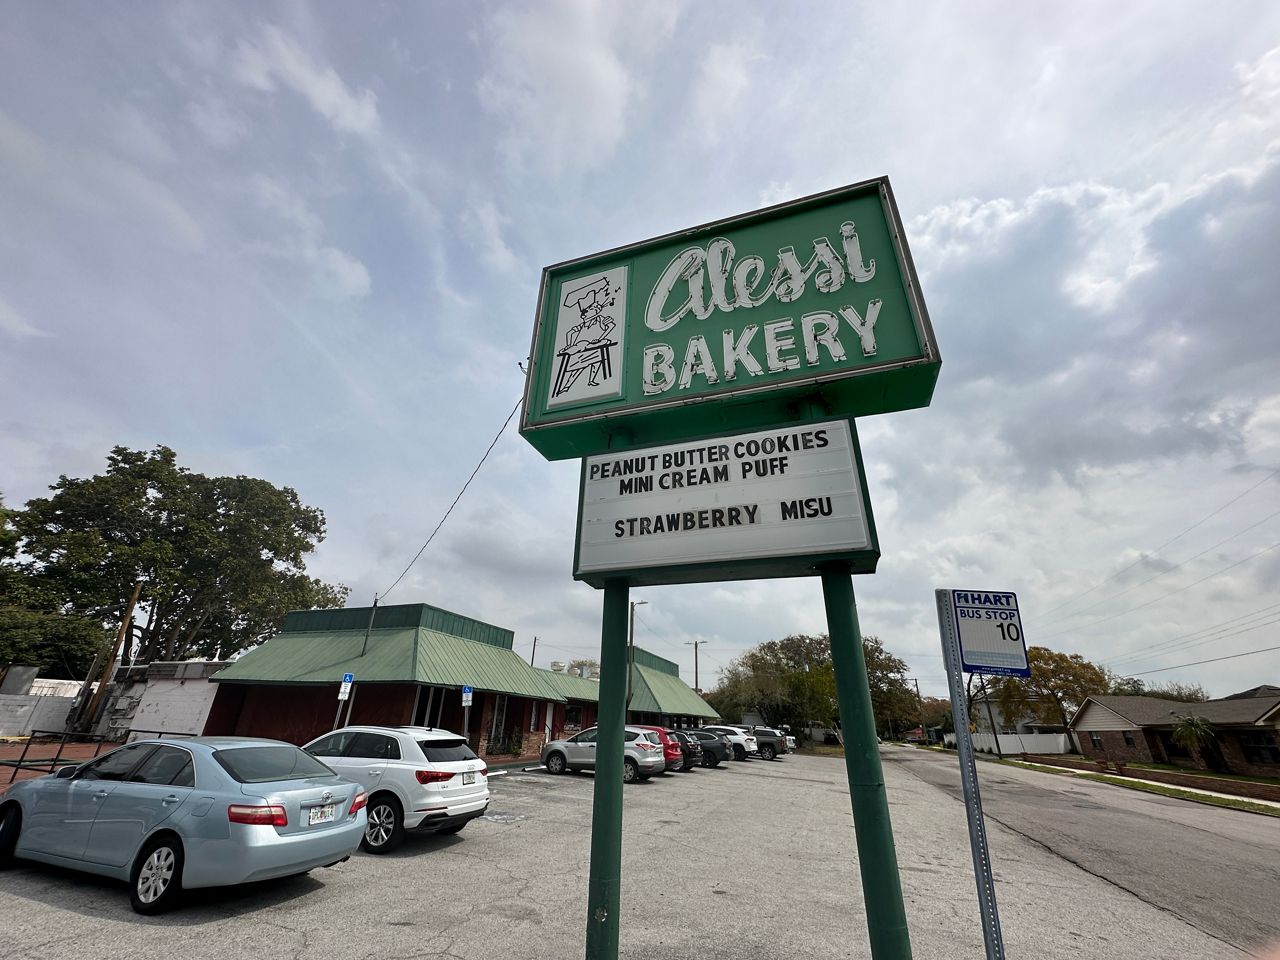 Alessi Bakery has been in the same spot on W. Cypress Street for more than 50 years. In that time, they've become a favorite for their Cuban sandwiches and pastries. (Spectrum Bay News 9/Brian Rea)